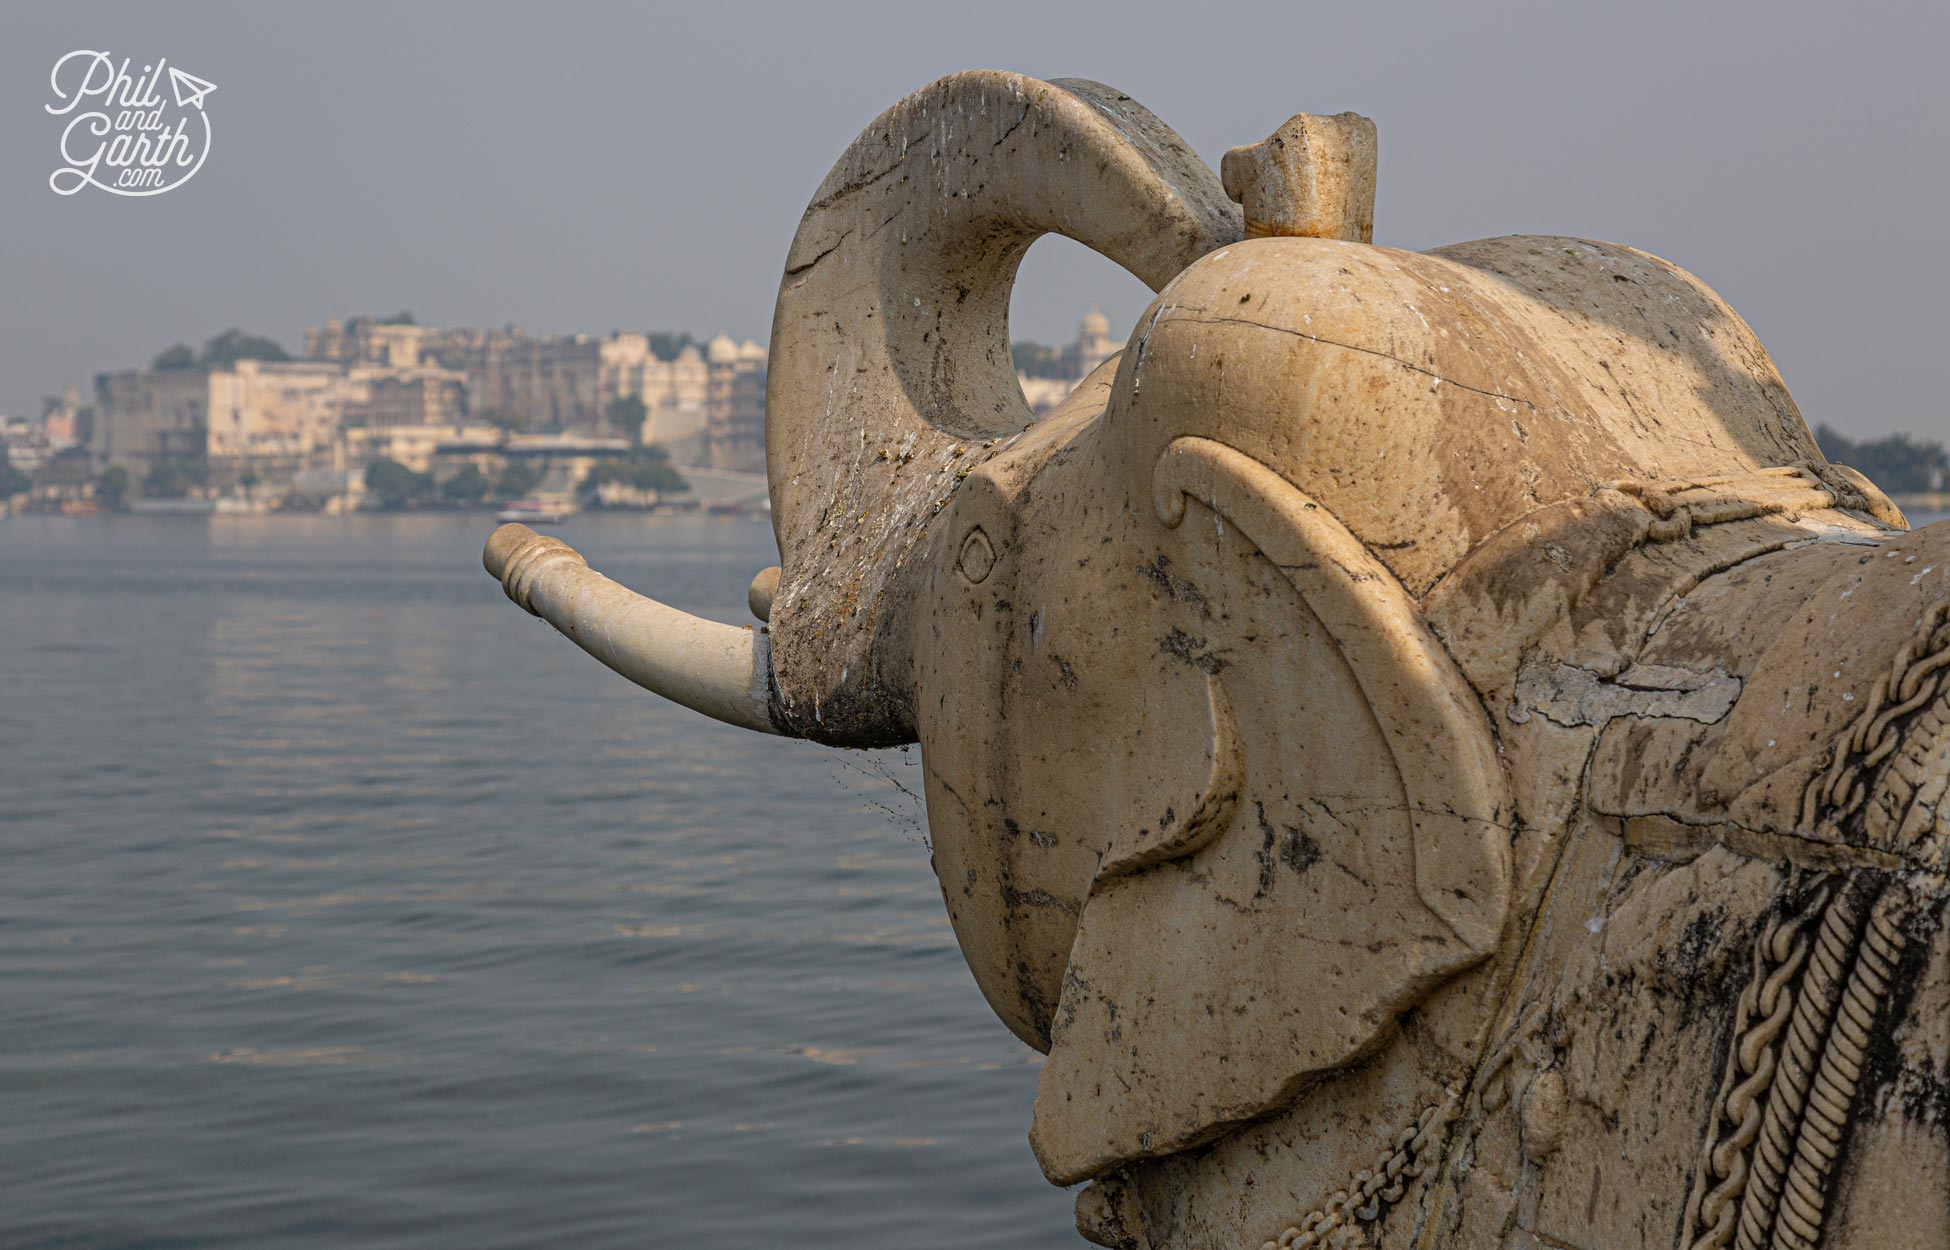 One of the marble elephants looking towards the City Palace from Jagmandir